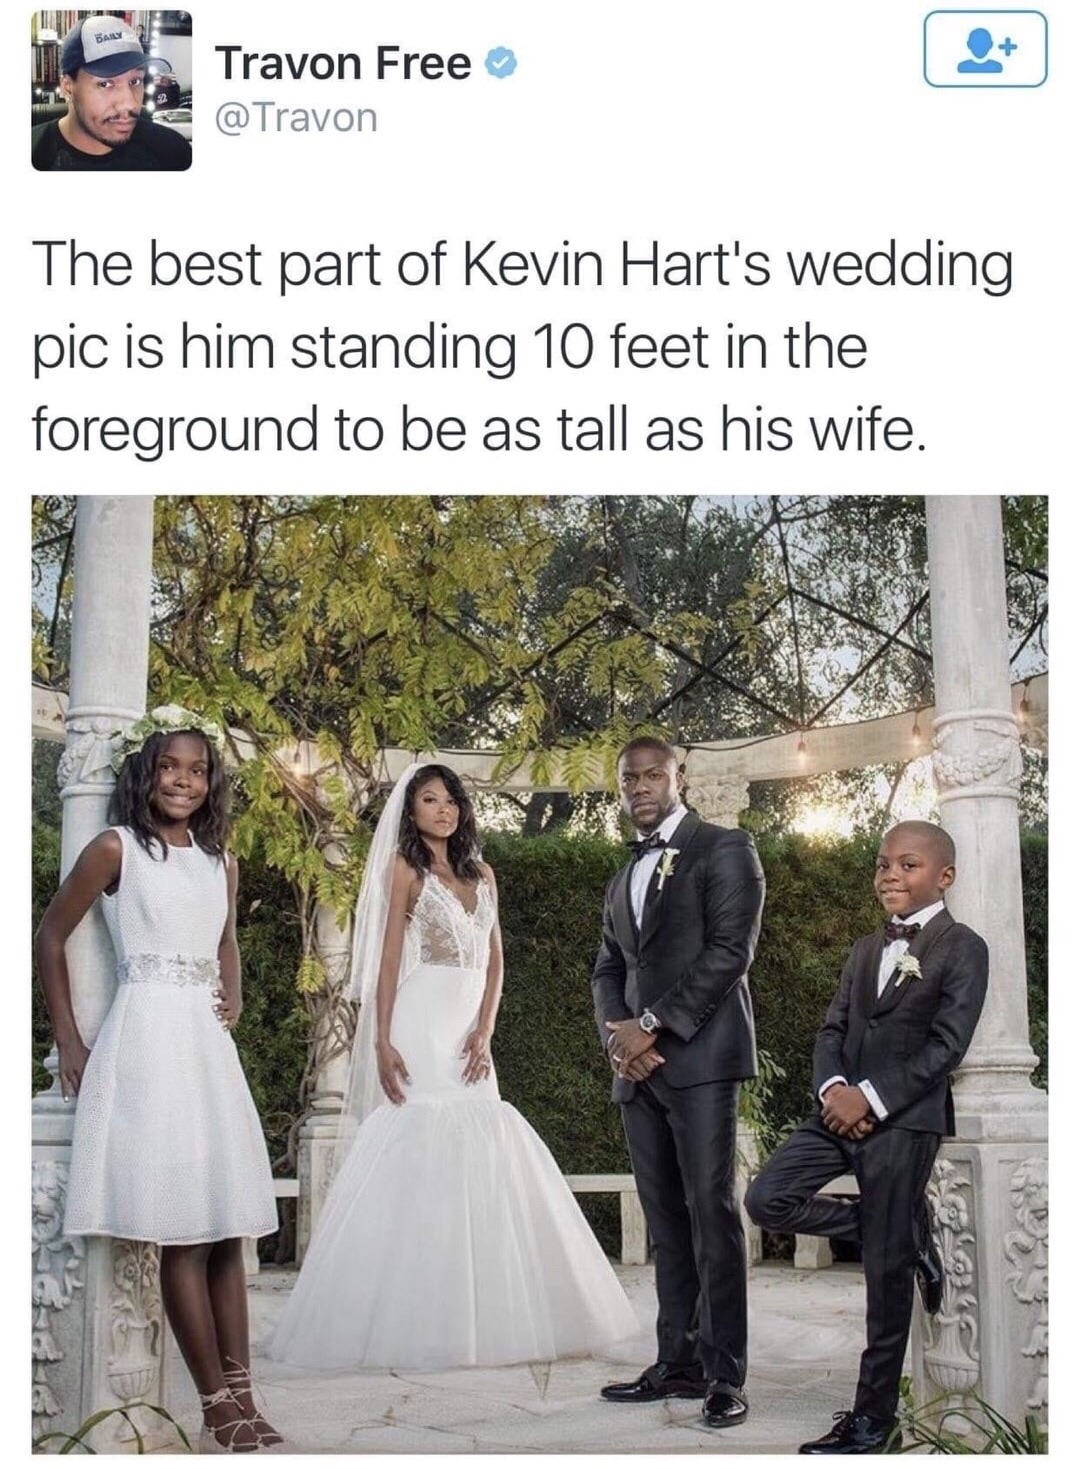 wedding funny - Daily Travon Free The best part of Kevin Hart's wedding pic is him standing 10 feet in the foreground to be as tall as his wife.